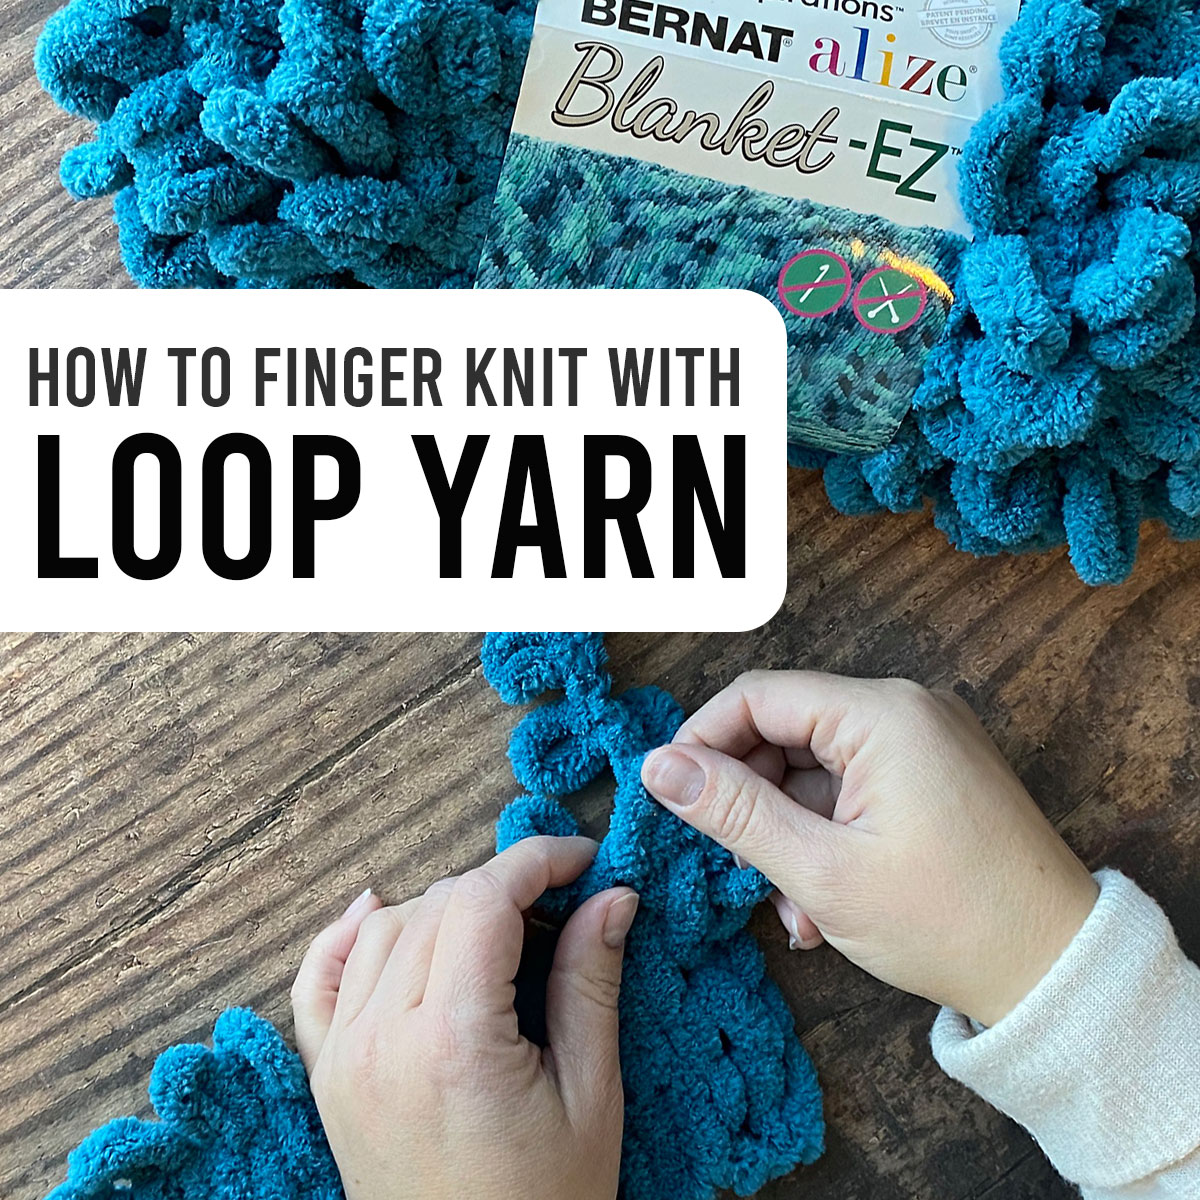 Can anyone recommend a nice, soft yarn that's easy to work with? I